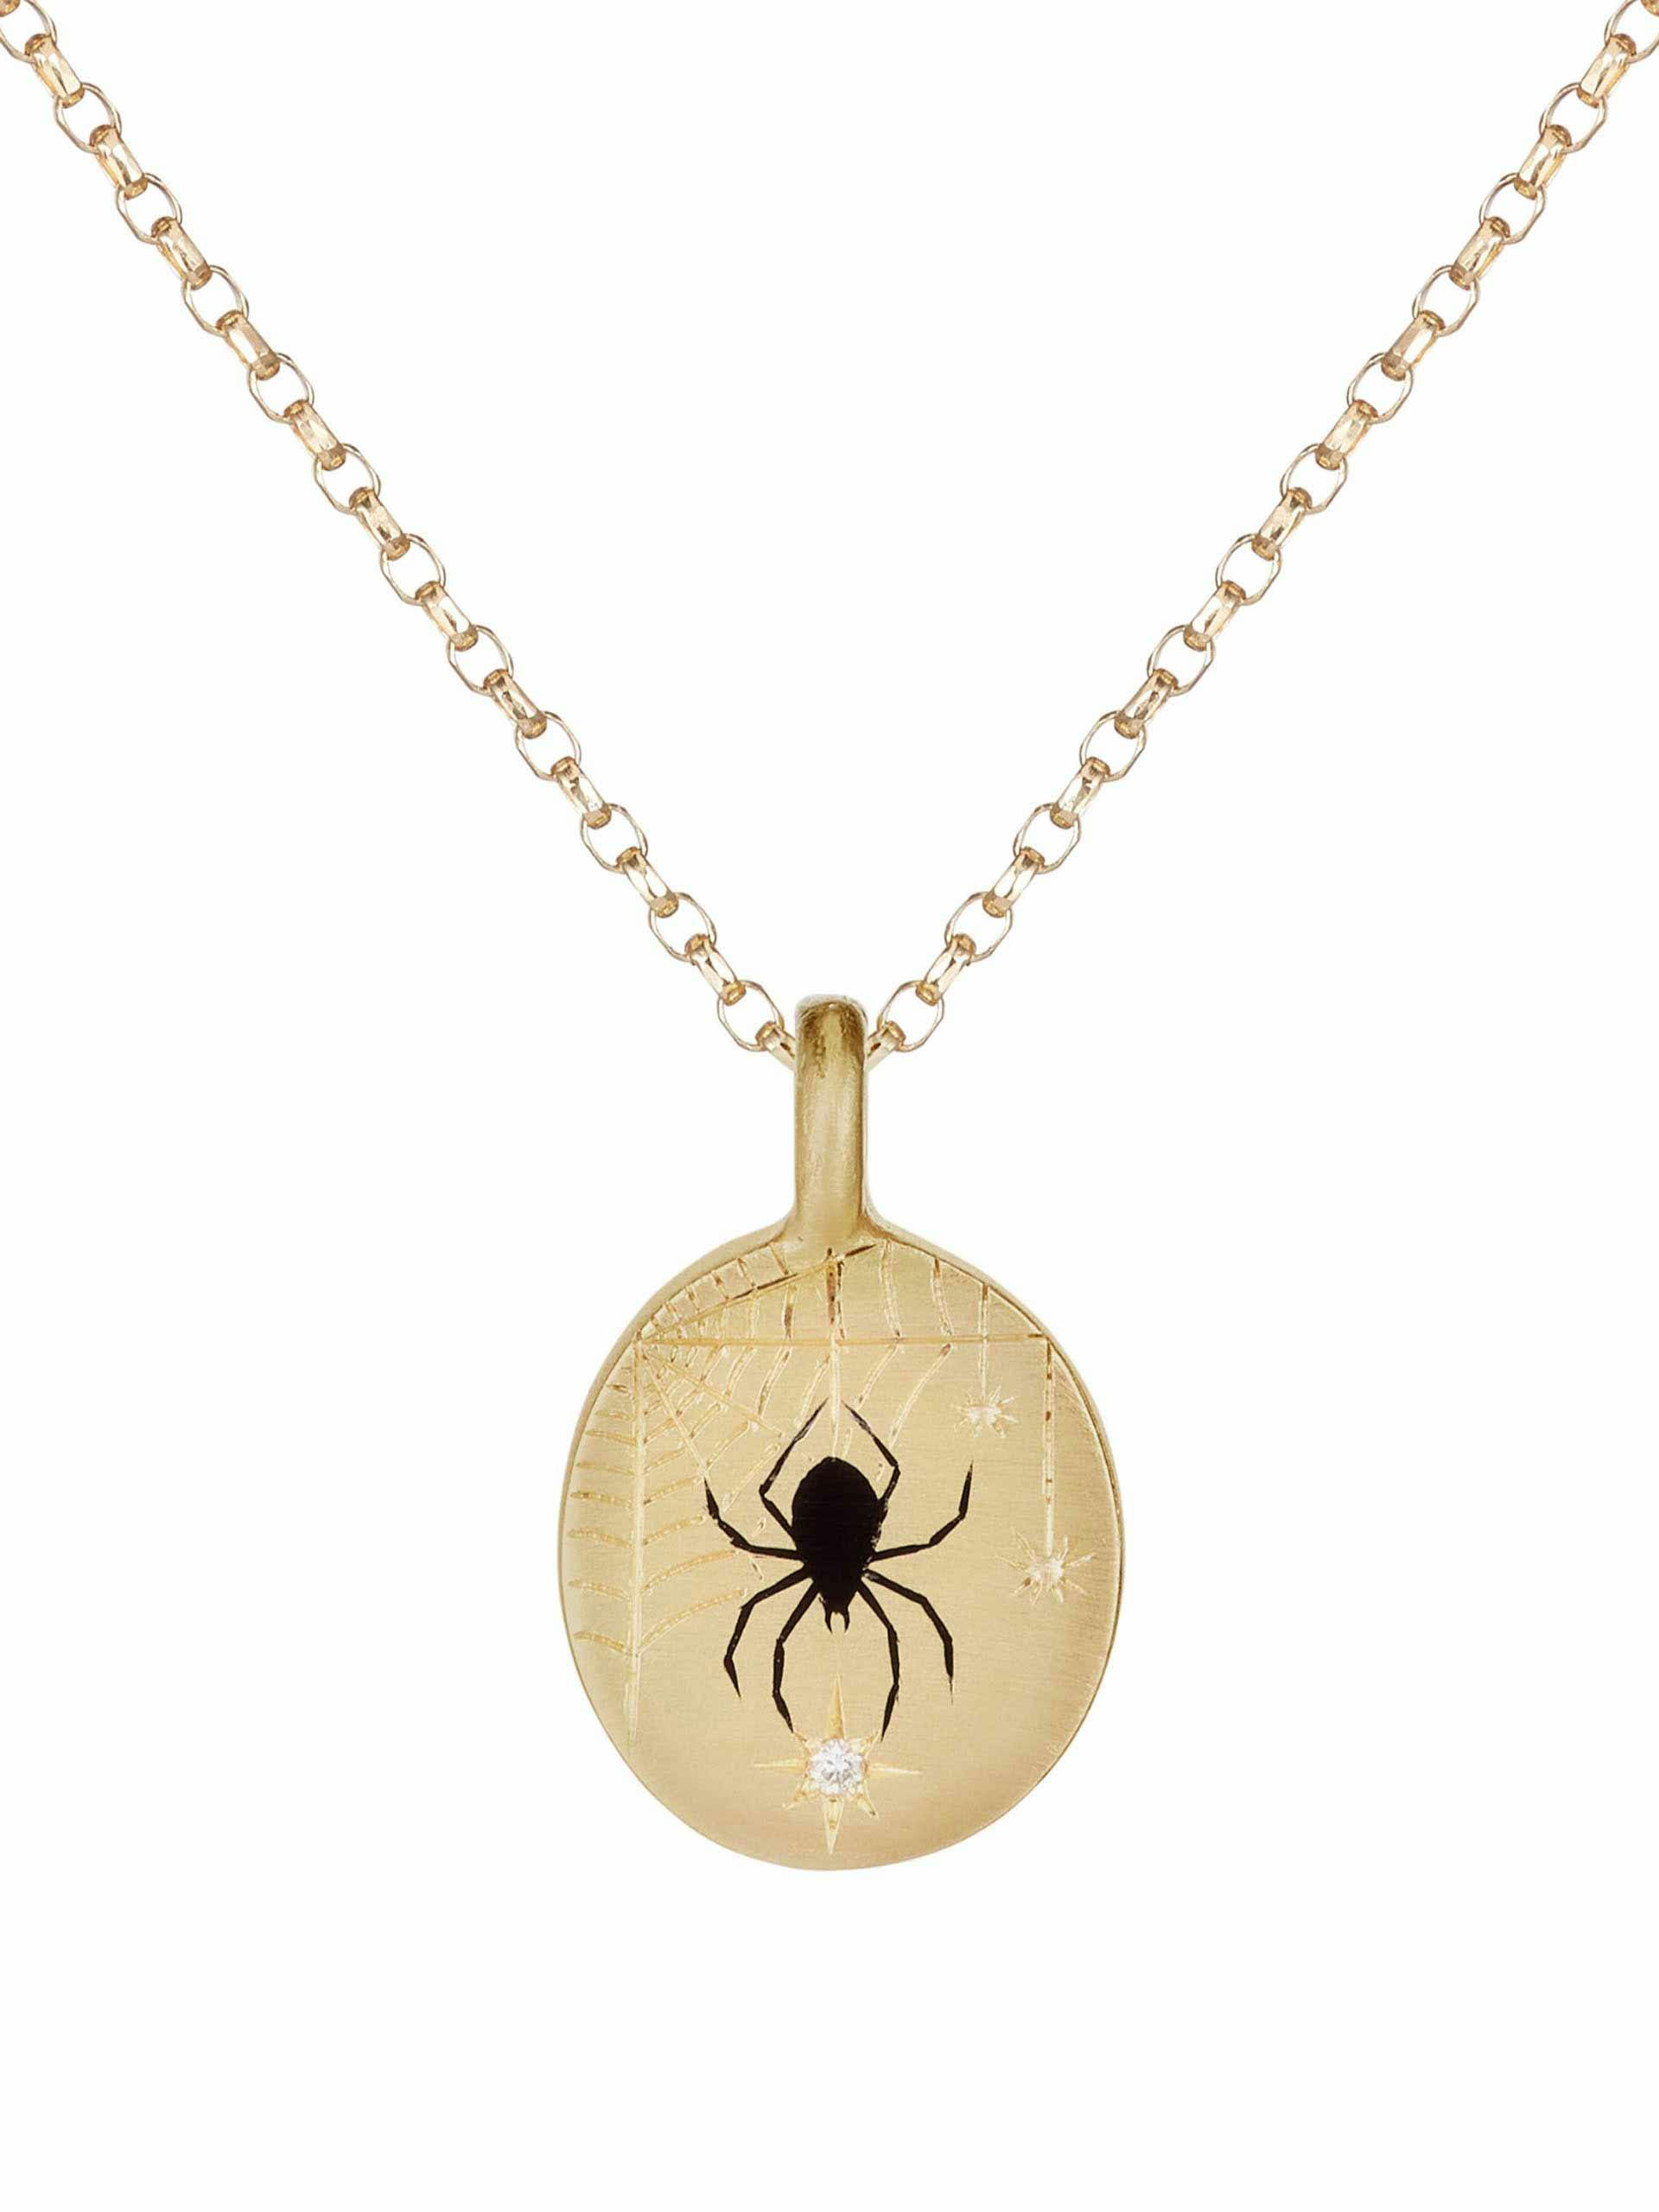 Spider & diamond gold hand-painted enamel necklace